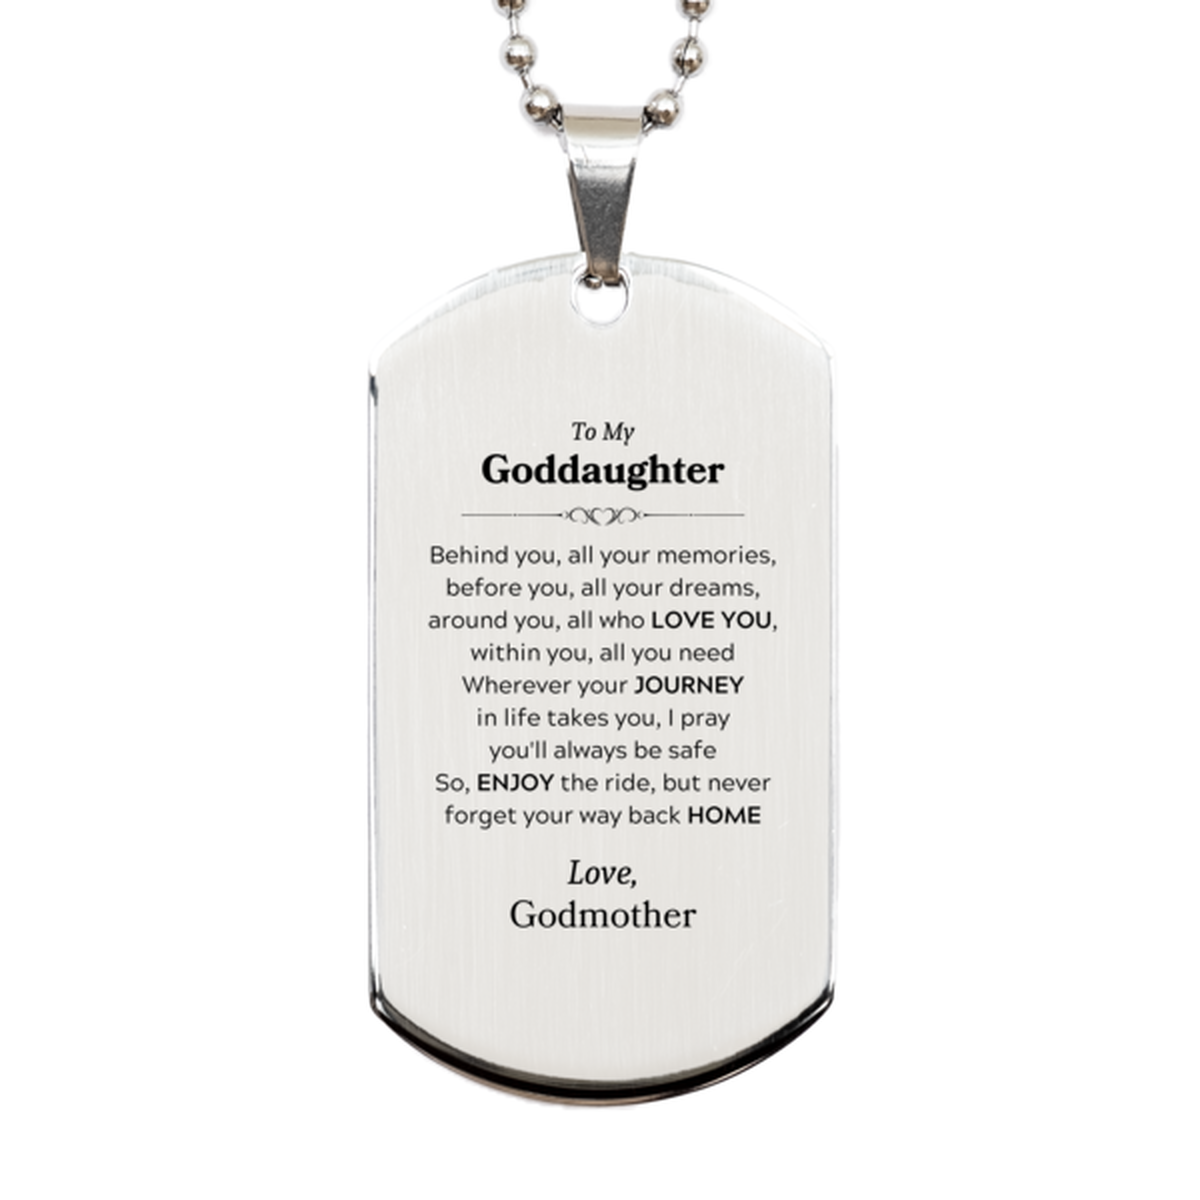 To My Goddaughter Graduation Gifts from Godmother, Goddaughter Silver Dog Tag Christmas Birthday Gifts for Goddaughter Behind you, all your memories, before you, all your dreams. Love, Godmother